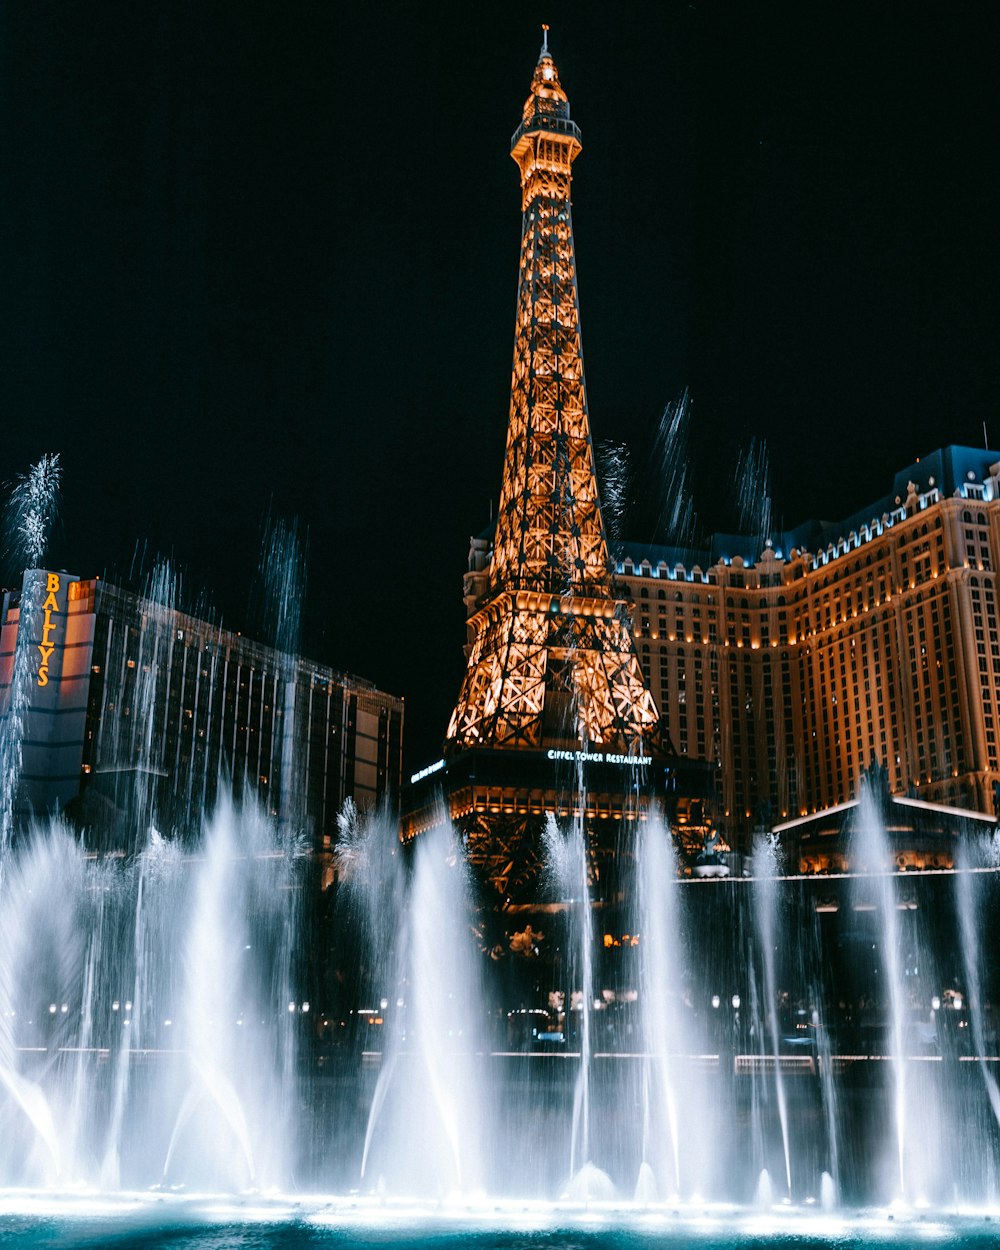 The eiffel tower is lit up at night photo – Free Usa Image on Unsplash